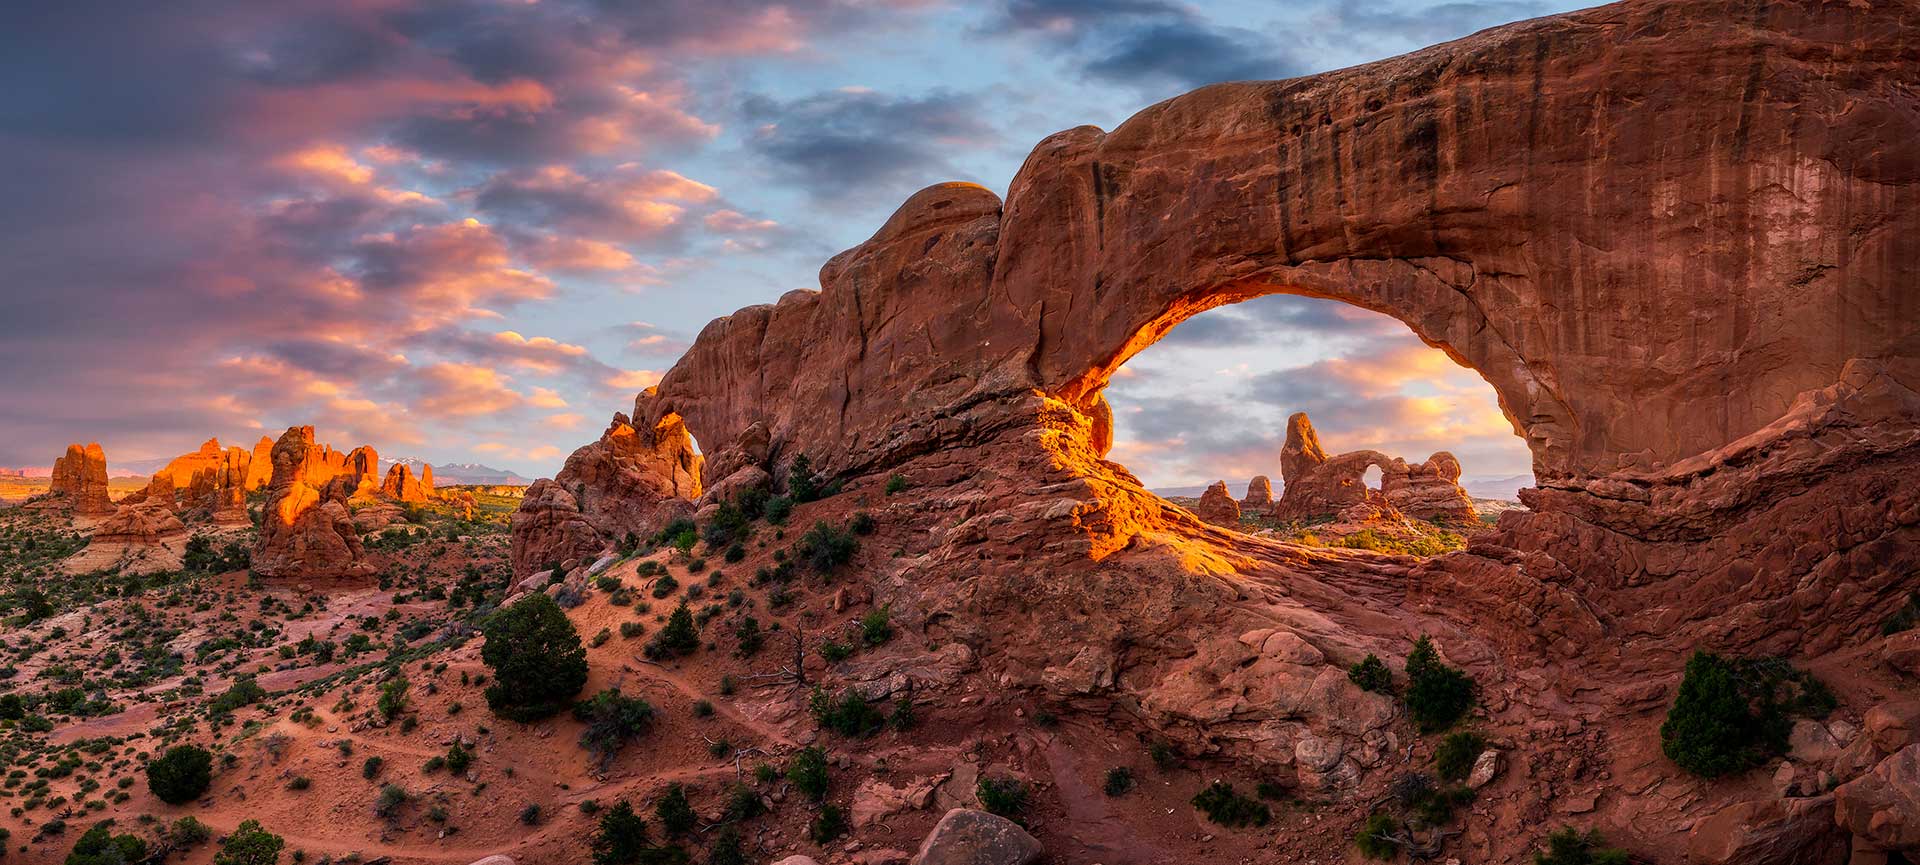 Arches National Park Trip Planner — Discover Moab, Utah